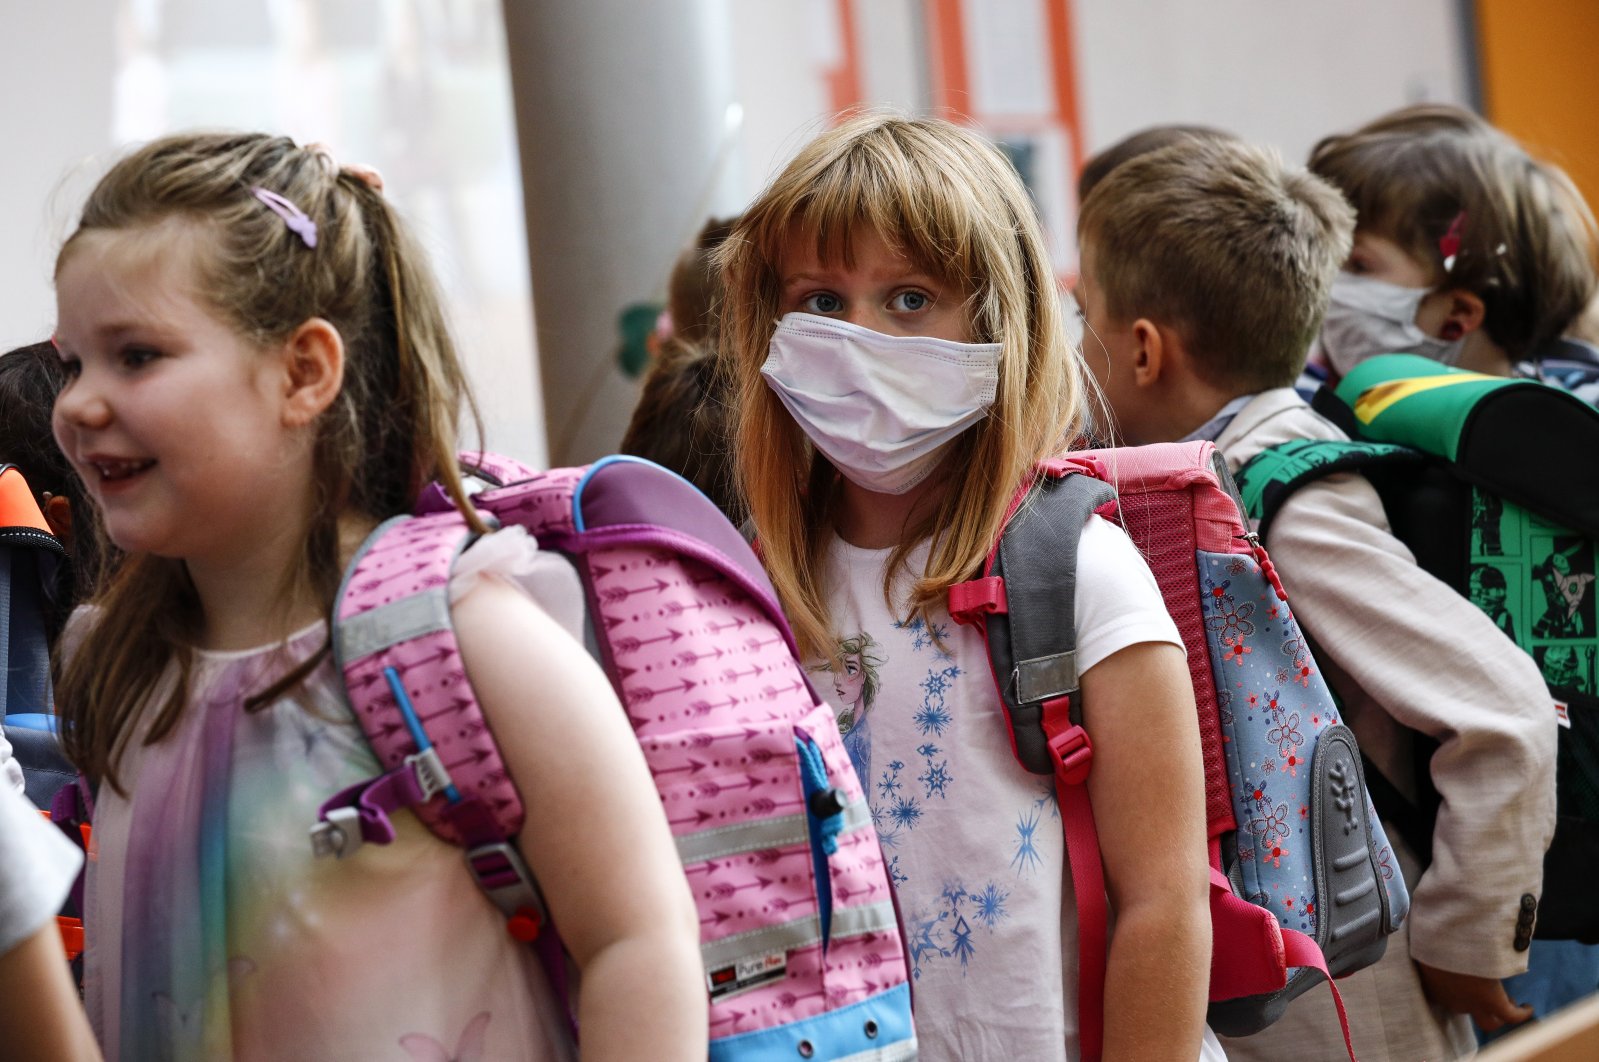 New pupil Angelina Bojahr (C) wears a sanitary mask during an enrolment ceremony in the Lankow elementary school in Schwerin, Germany, August 1, 2020. (EPA Photo)